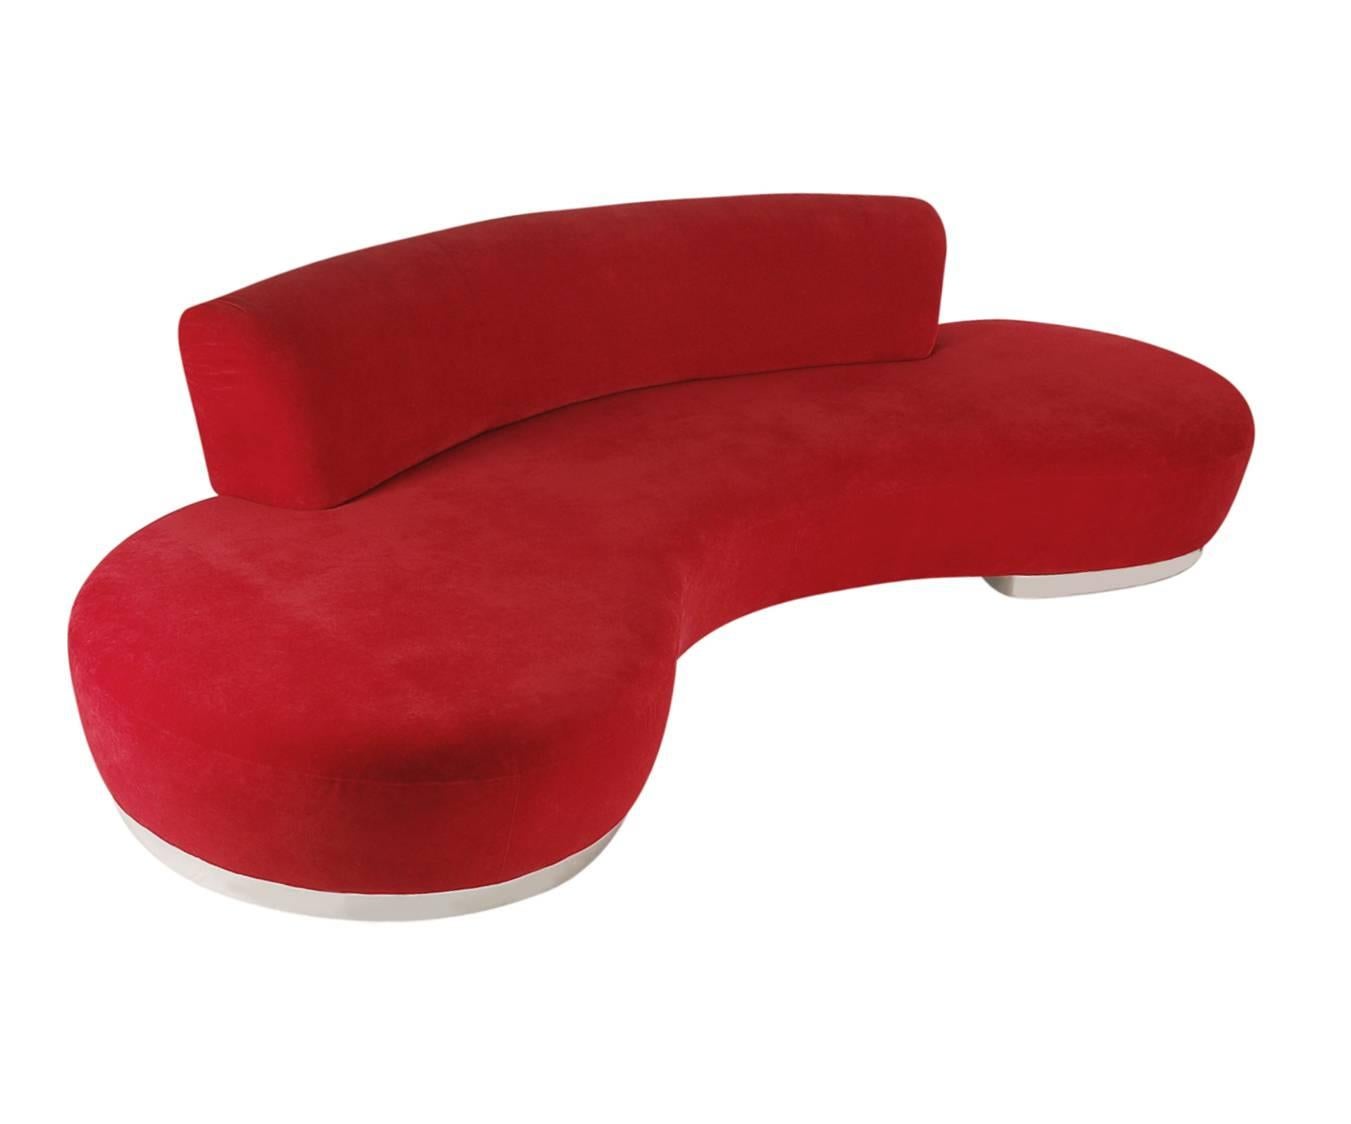 A monumental sculptural sofa attributed to Vladimir Kagan. It was manufactured in the 1980s and recovered in the early 2000s with a faux red velvet. In nice clean ready to use condition.